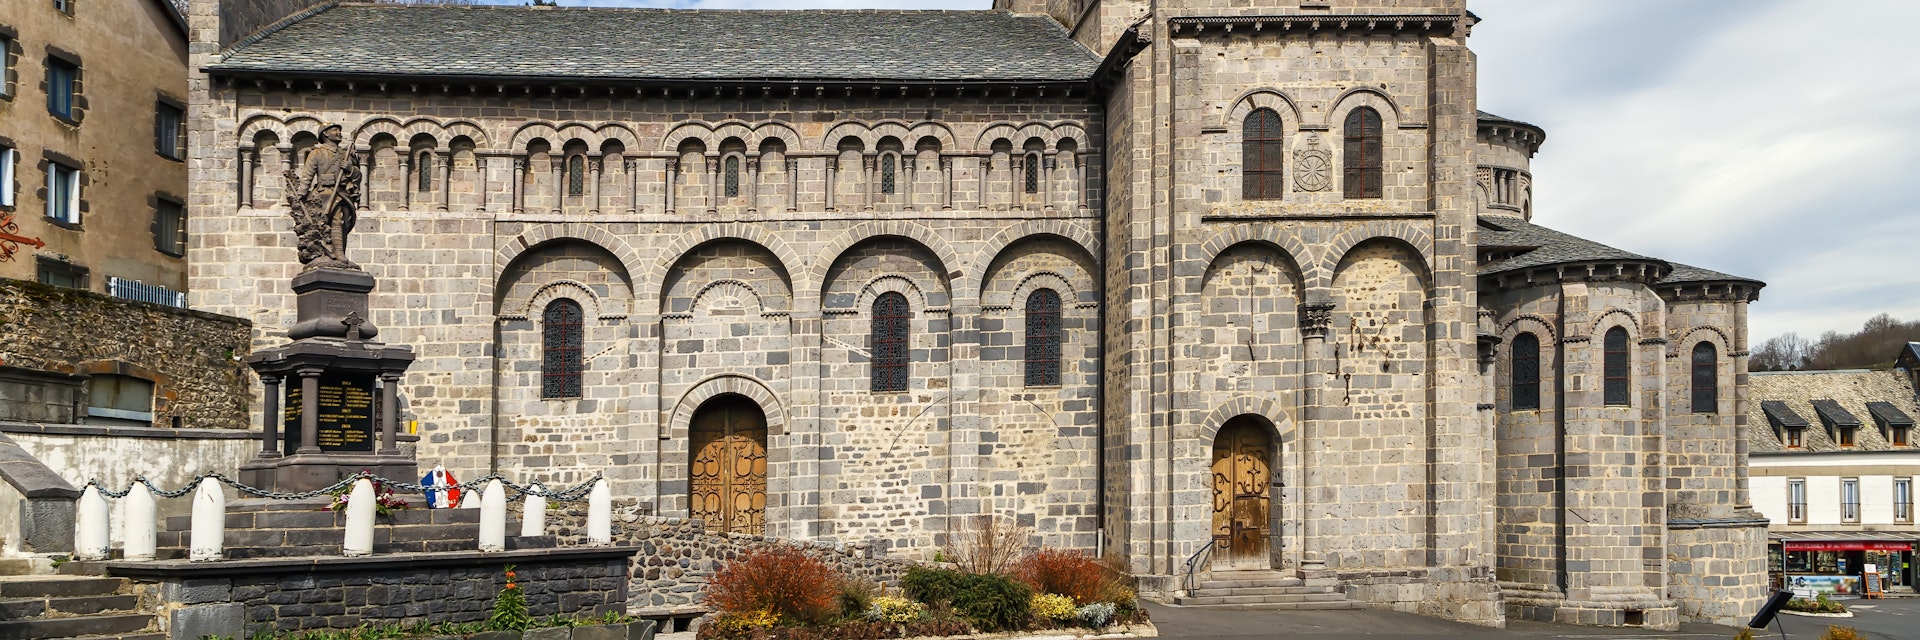 Notre-Dame Basilica is a Romanesque Auvergnat church located in Orcival, France.